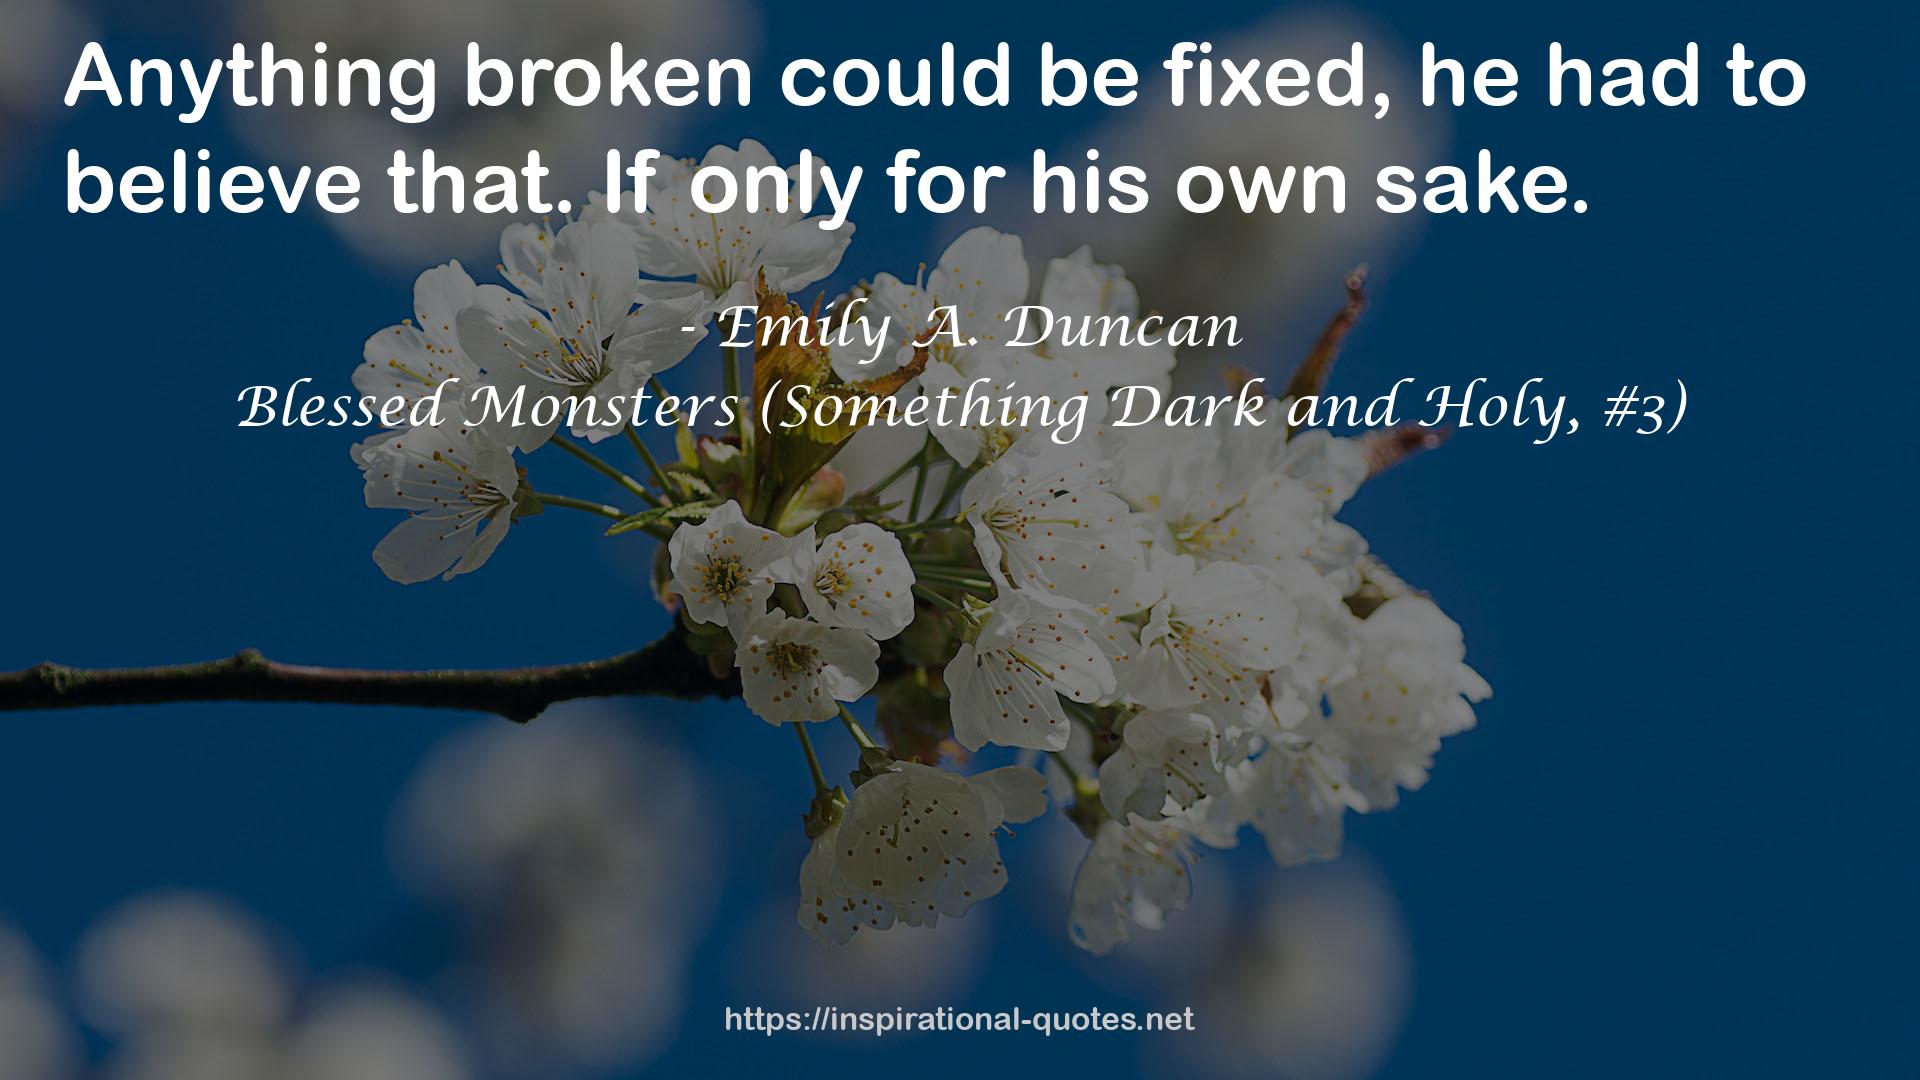 Blessed Monsters (Something Dark and Holy, #3) QUOTES